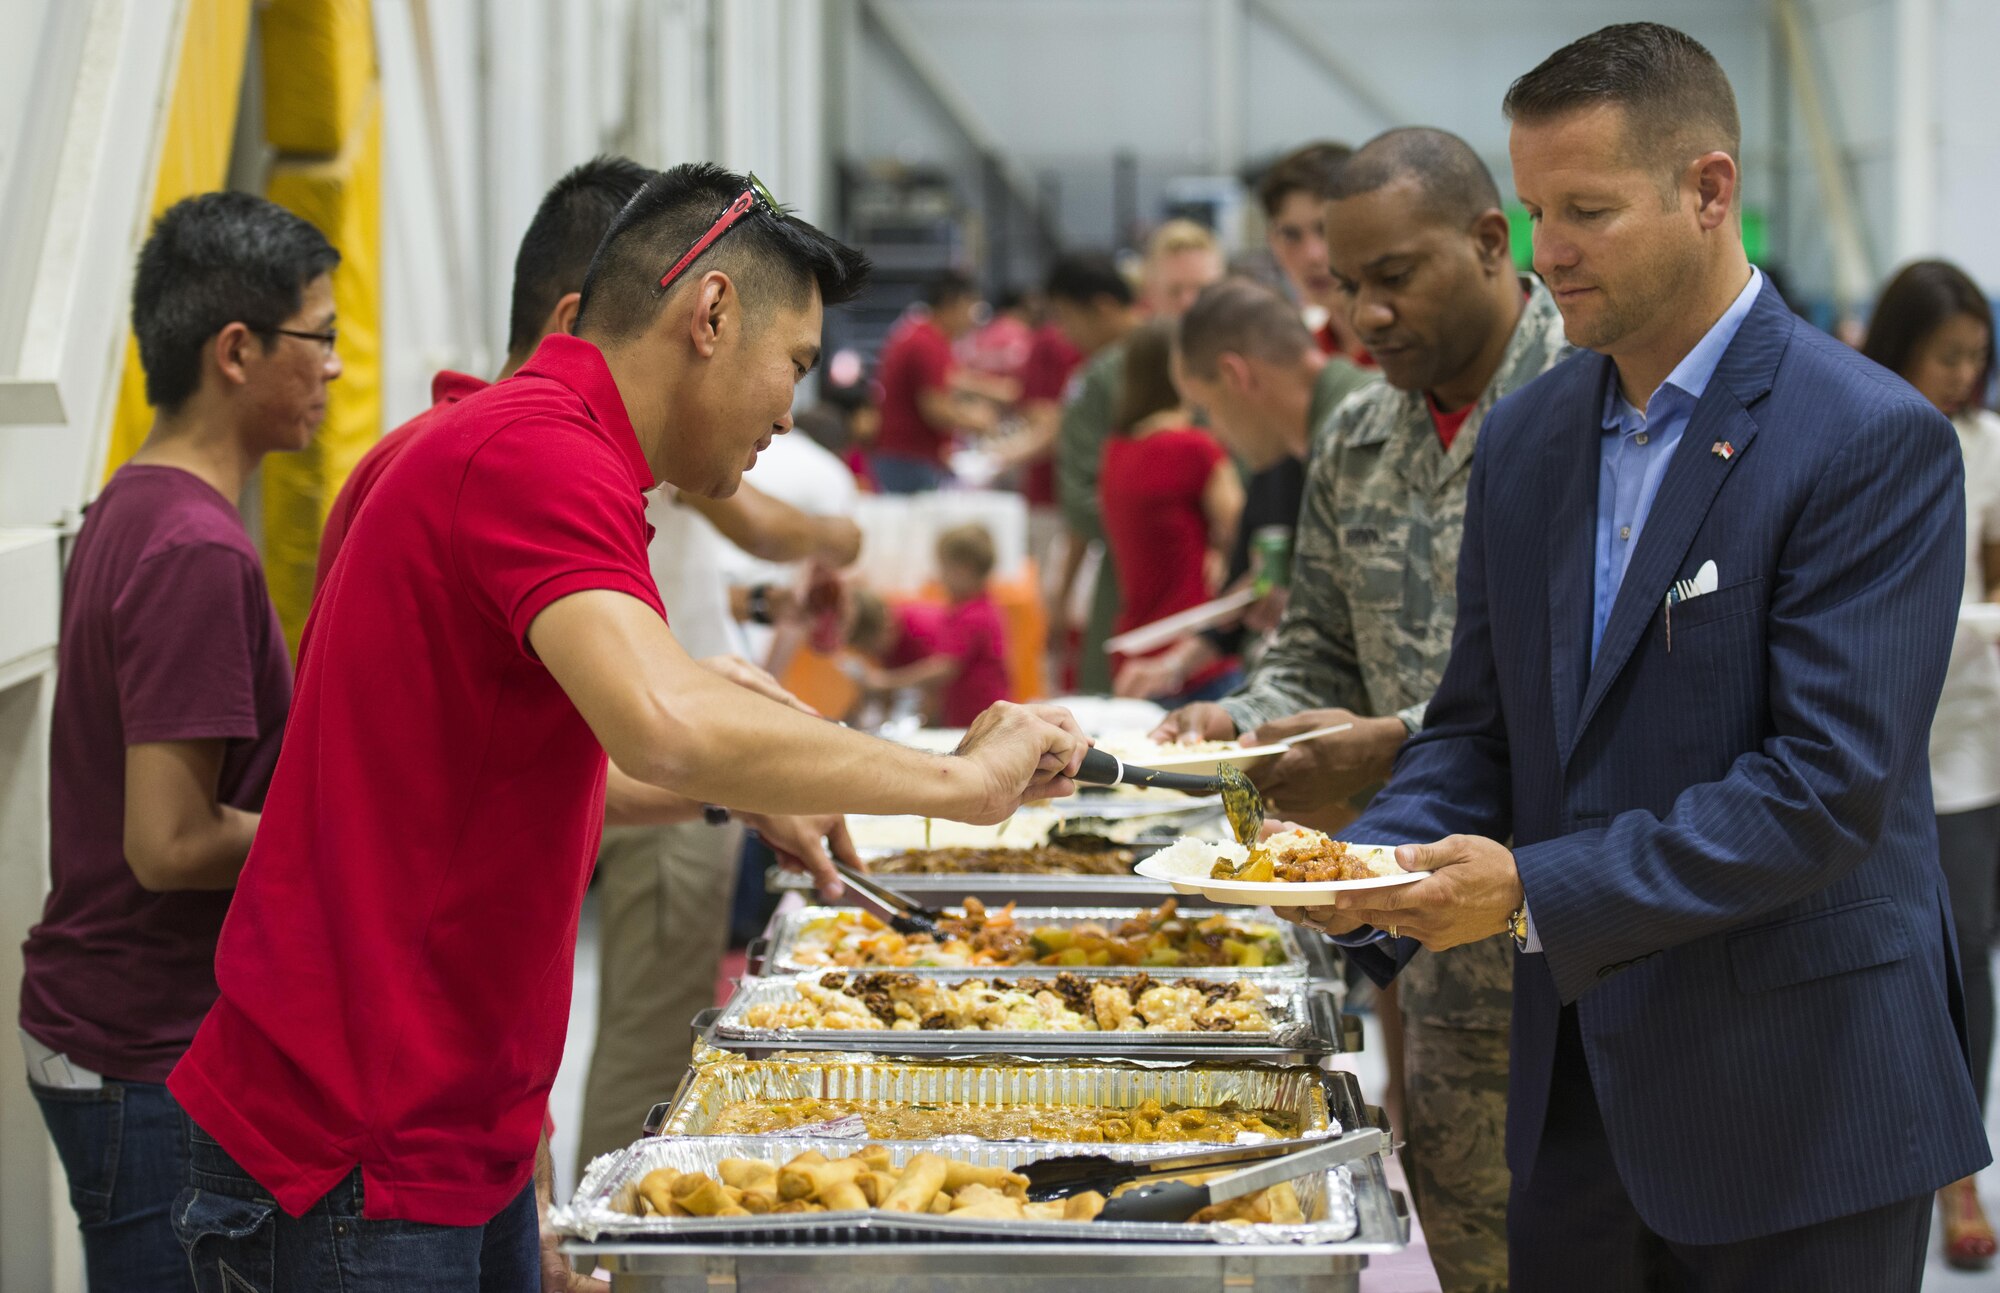 (From the right) Mountian Home Mayor Rich Sykes and 366th Fighter Wing Command Chief Master Sgt. David Brown receive food in a serving line at the Peace Carvin V National Day Celebration. The celebration included a parade of troops, an authentic Singaporean dinner and a cake-cutting ceremony involving both the base and local community. (U.S. Air Force photo by 2nd Lt. Kippun Sumner/Released)